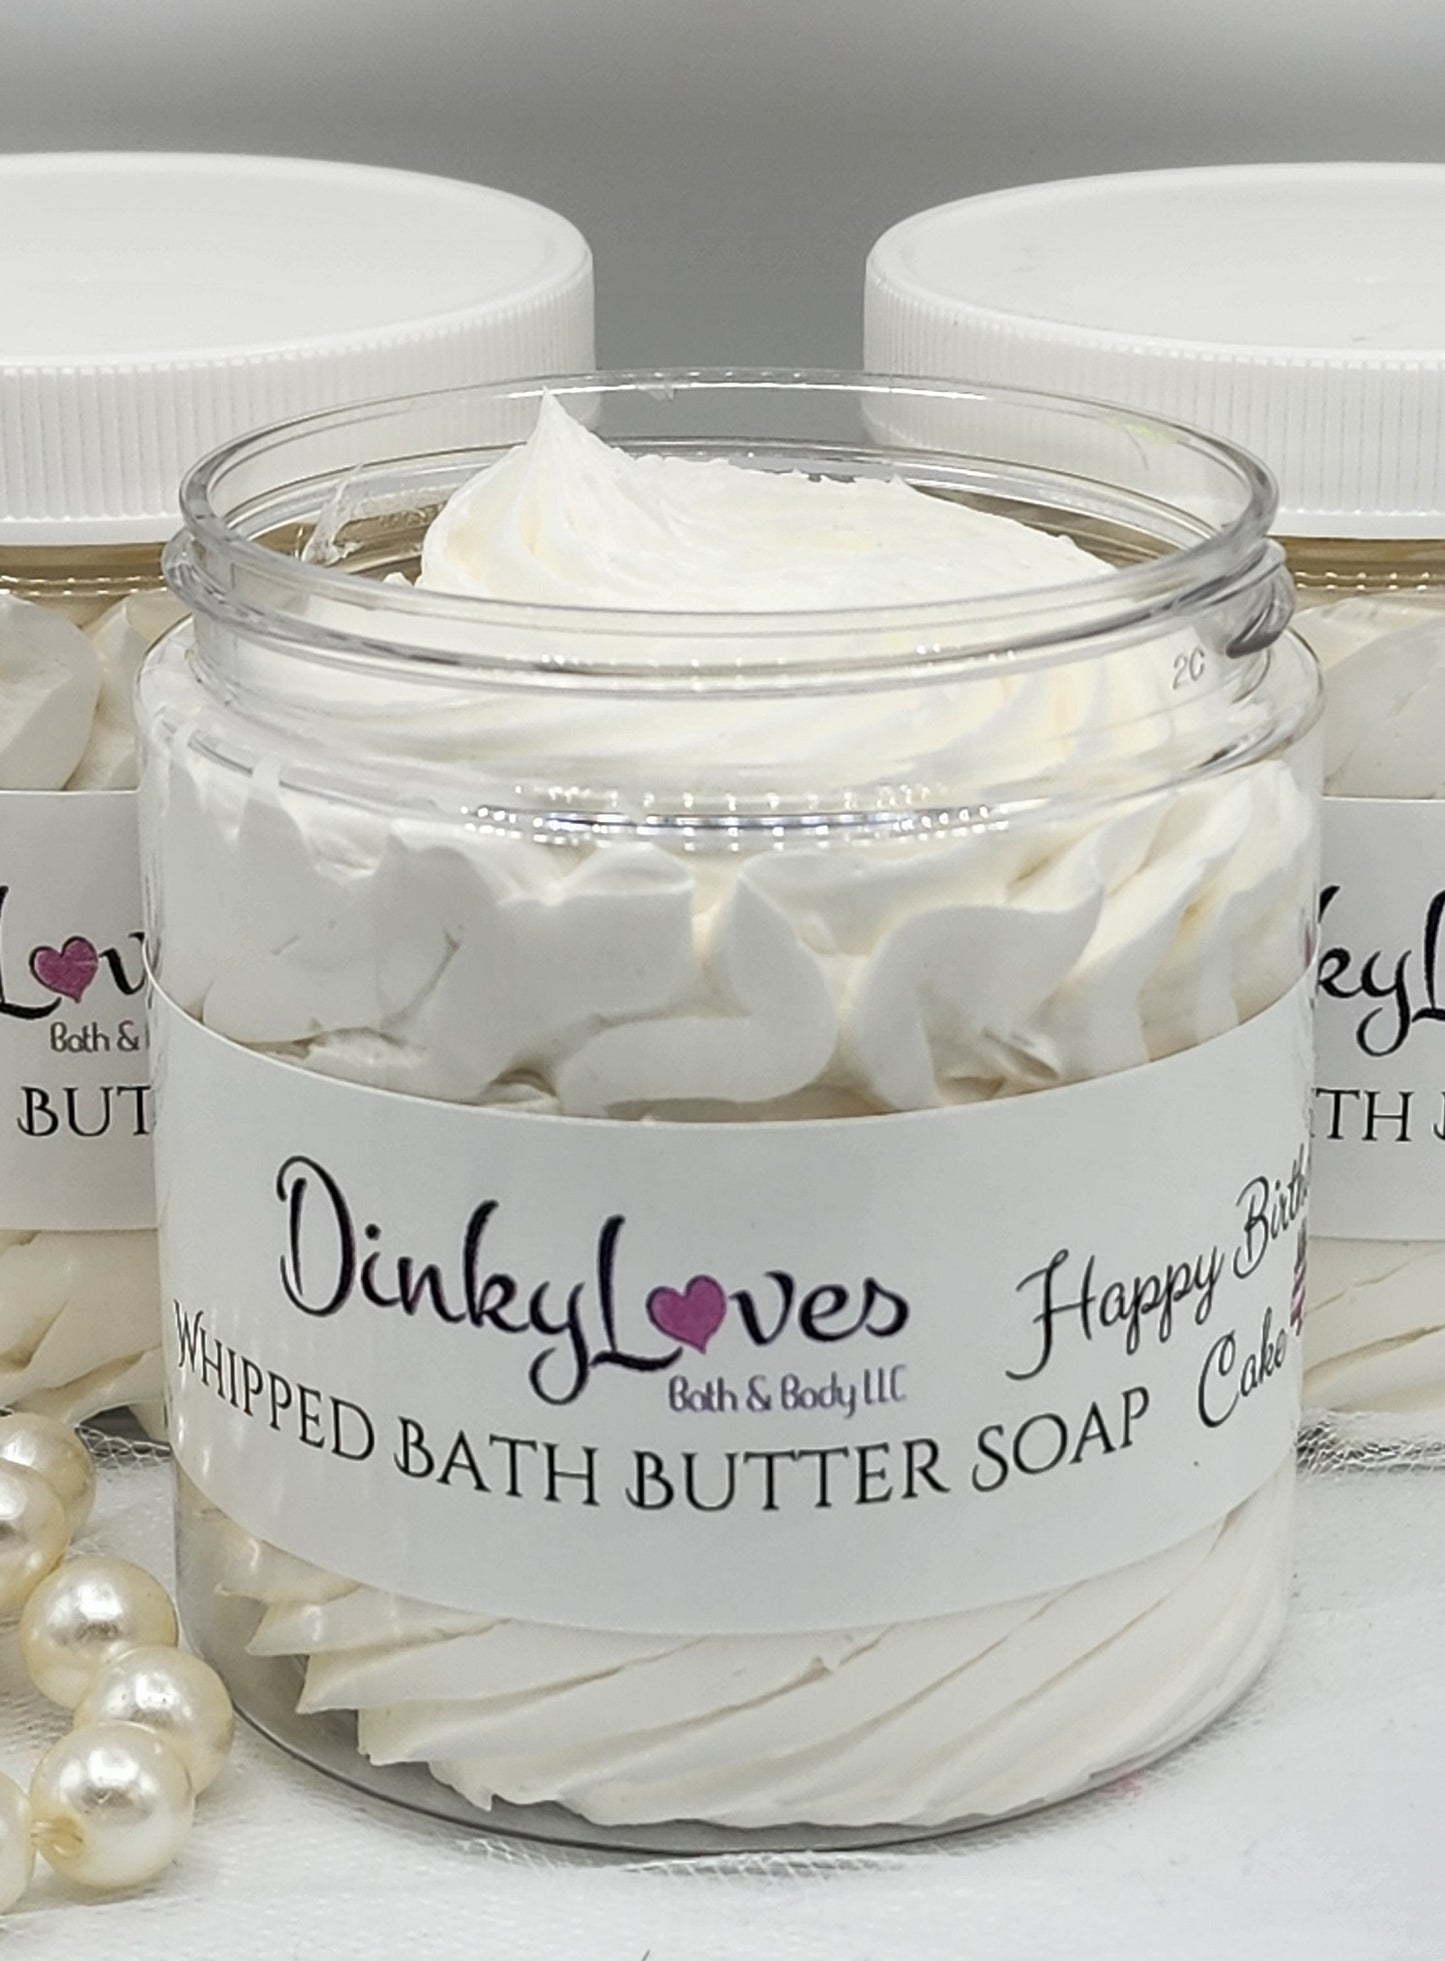 HAPPY BIRTHDAY Whipped Bath Butter Soap / Gift Idea / Luxury Product / Cocoa Butter